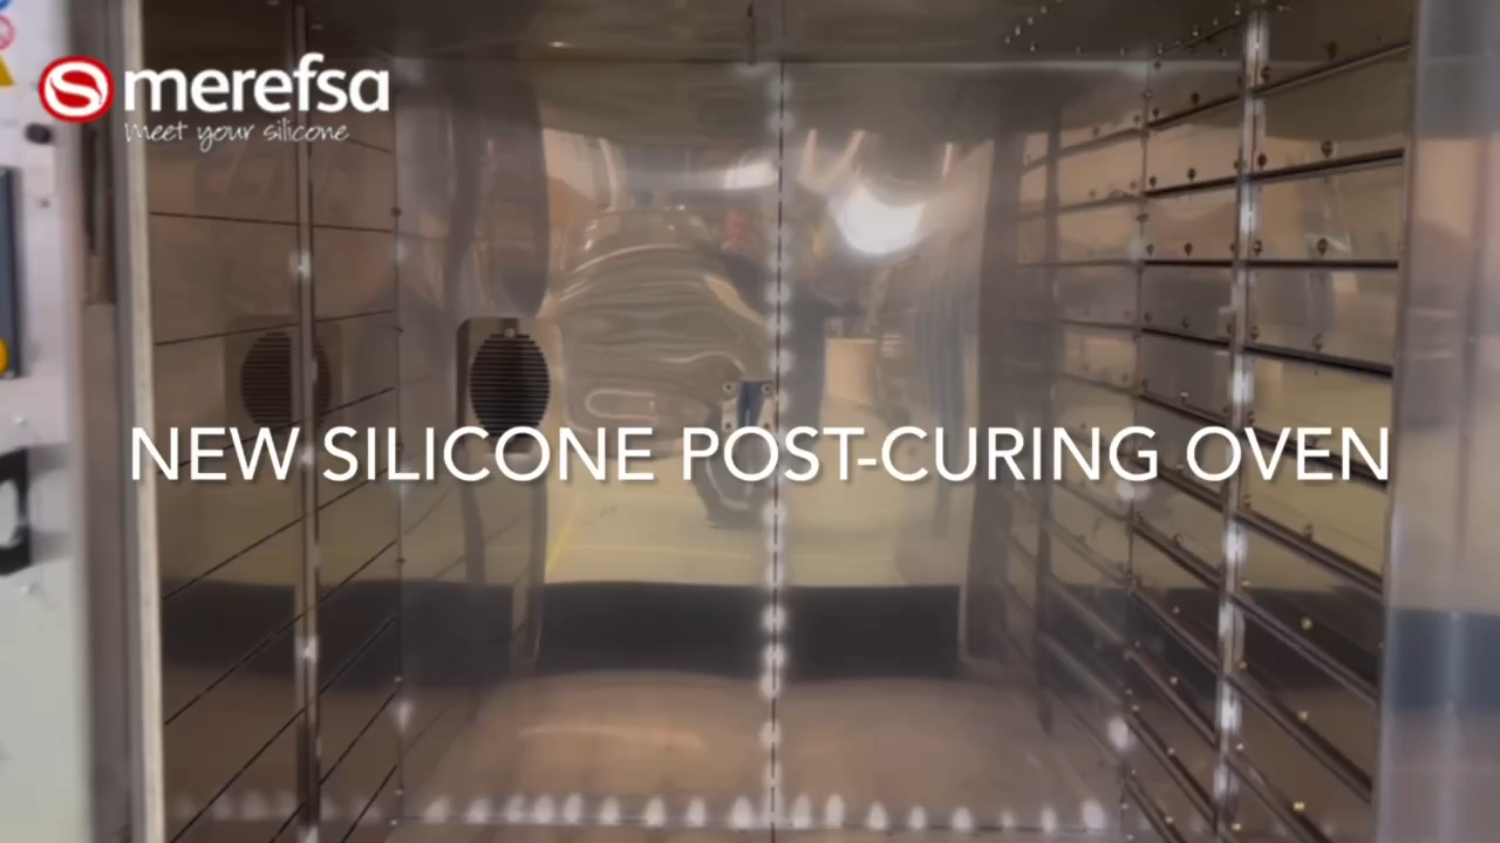 We've expanded our silicone post-curing section!